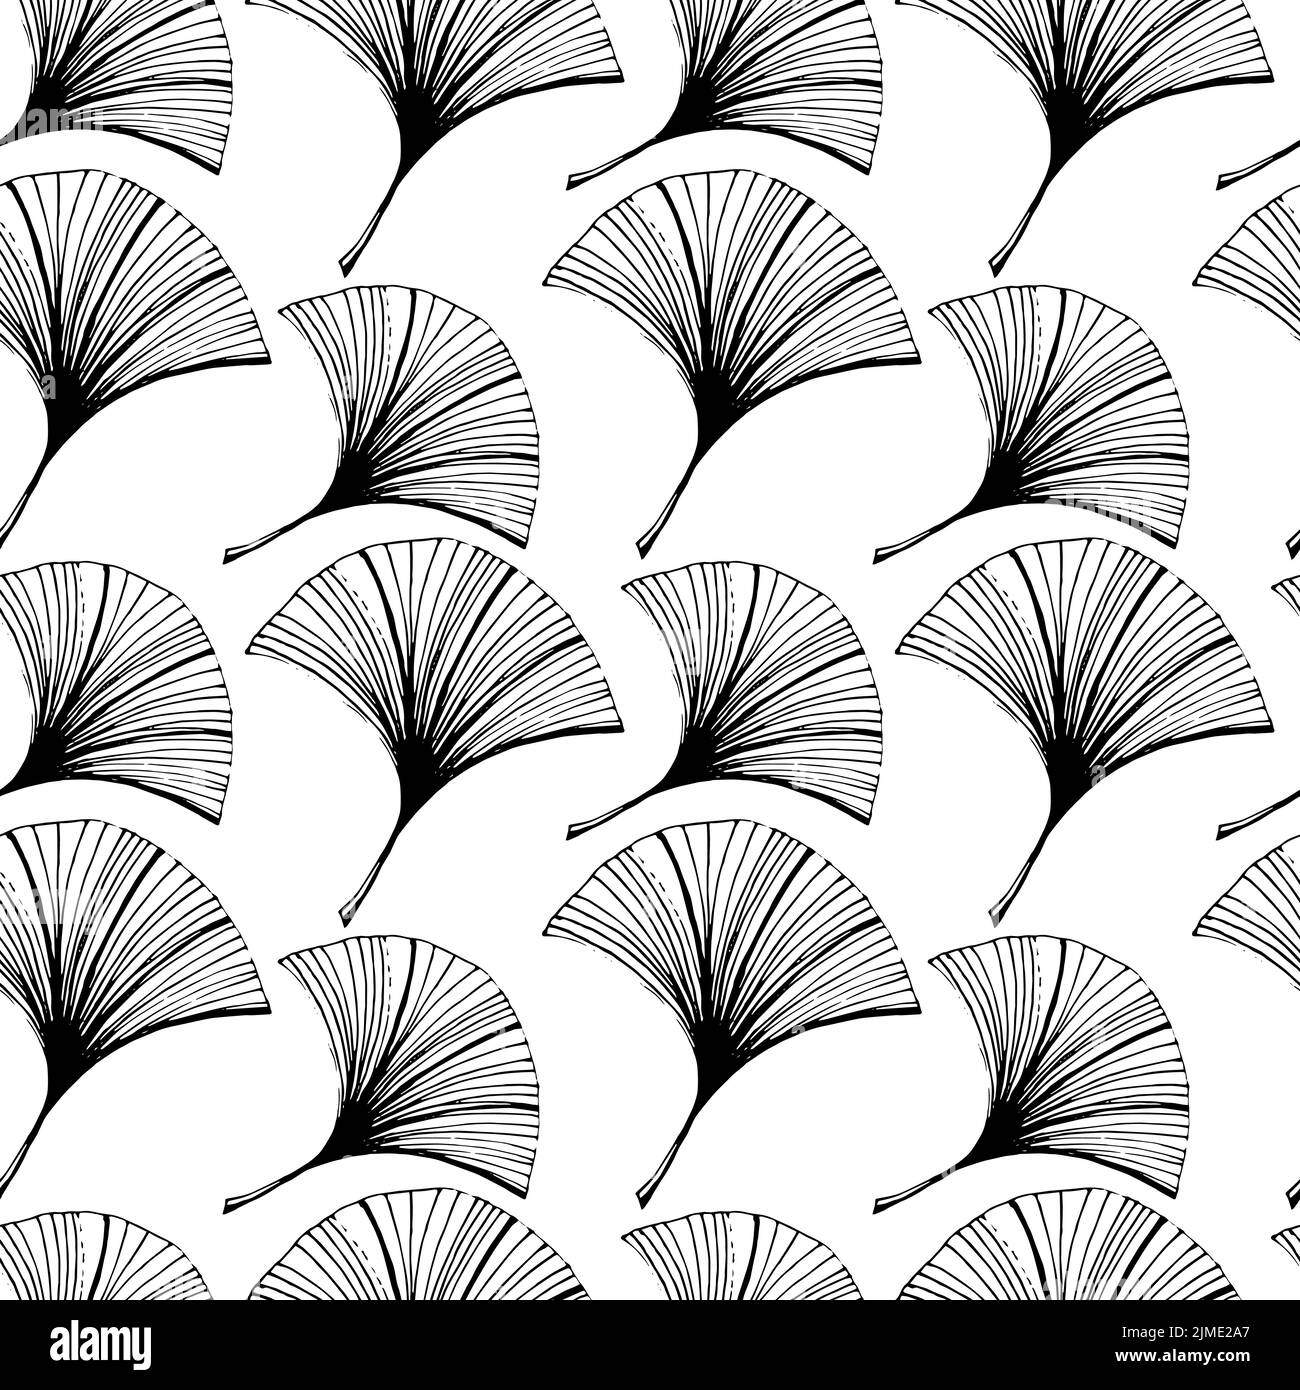 A seamless hand-drawn ginkgo leaf pattern in sketch style. Leaves at different angles on a white background. Leaf shape in the form of a duck's foot. Stock Vector